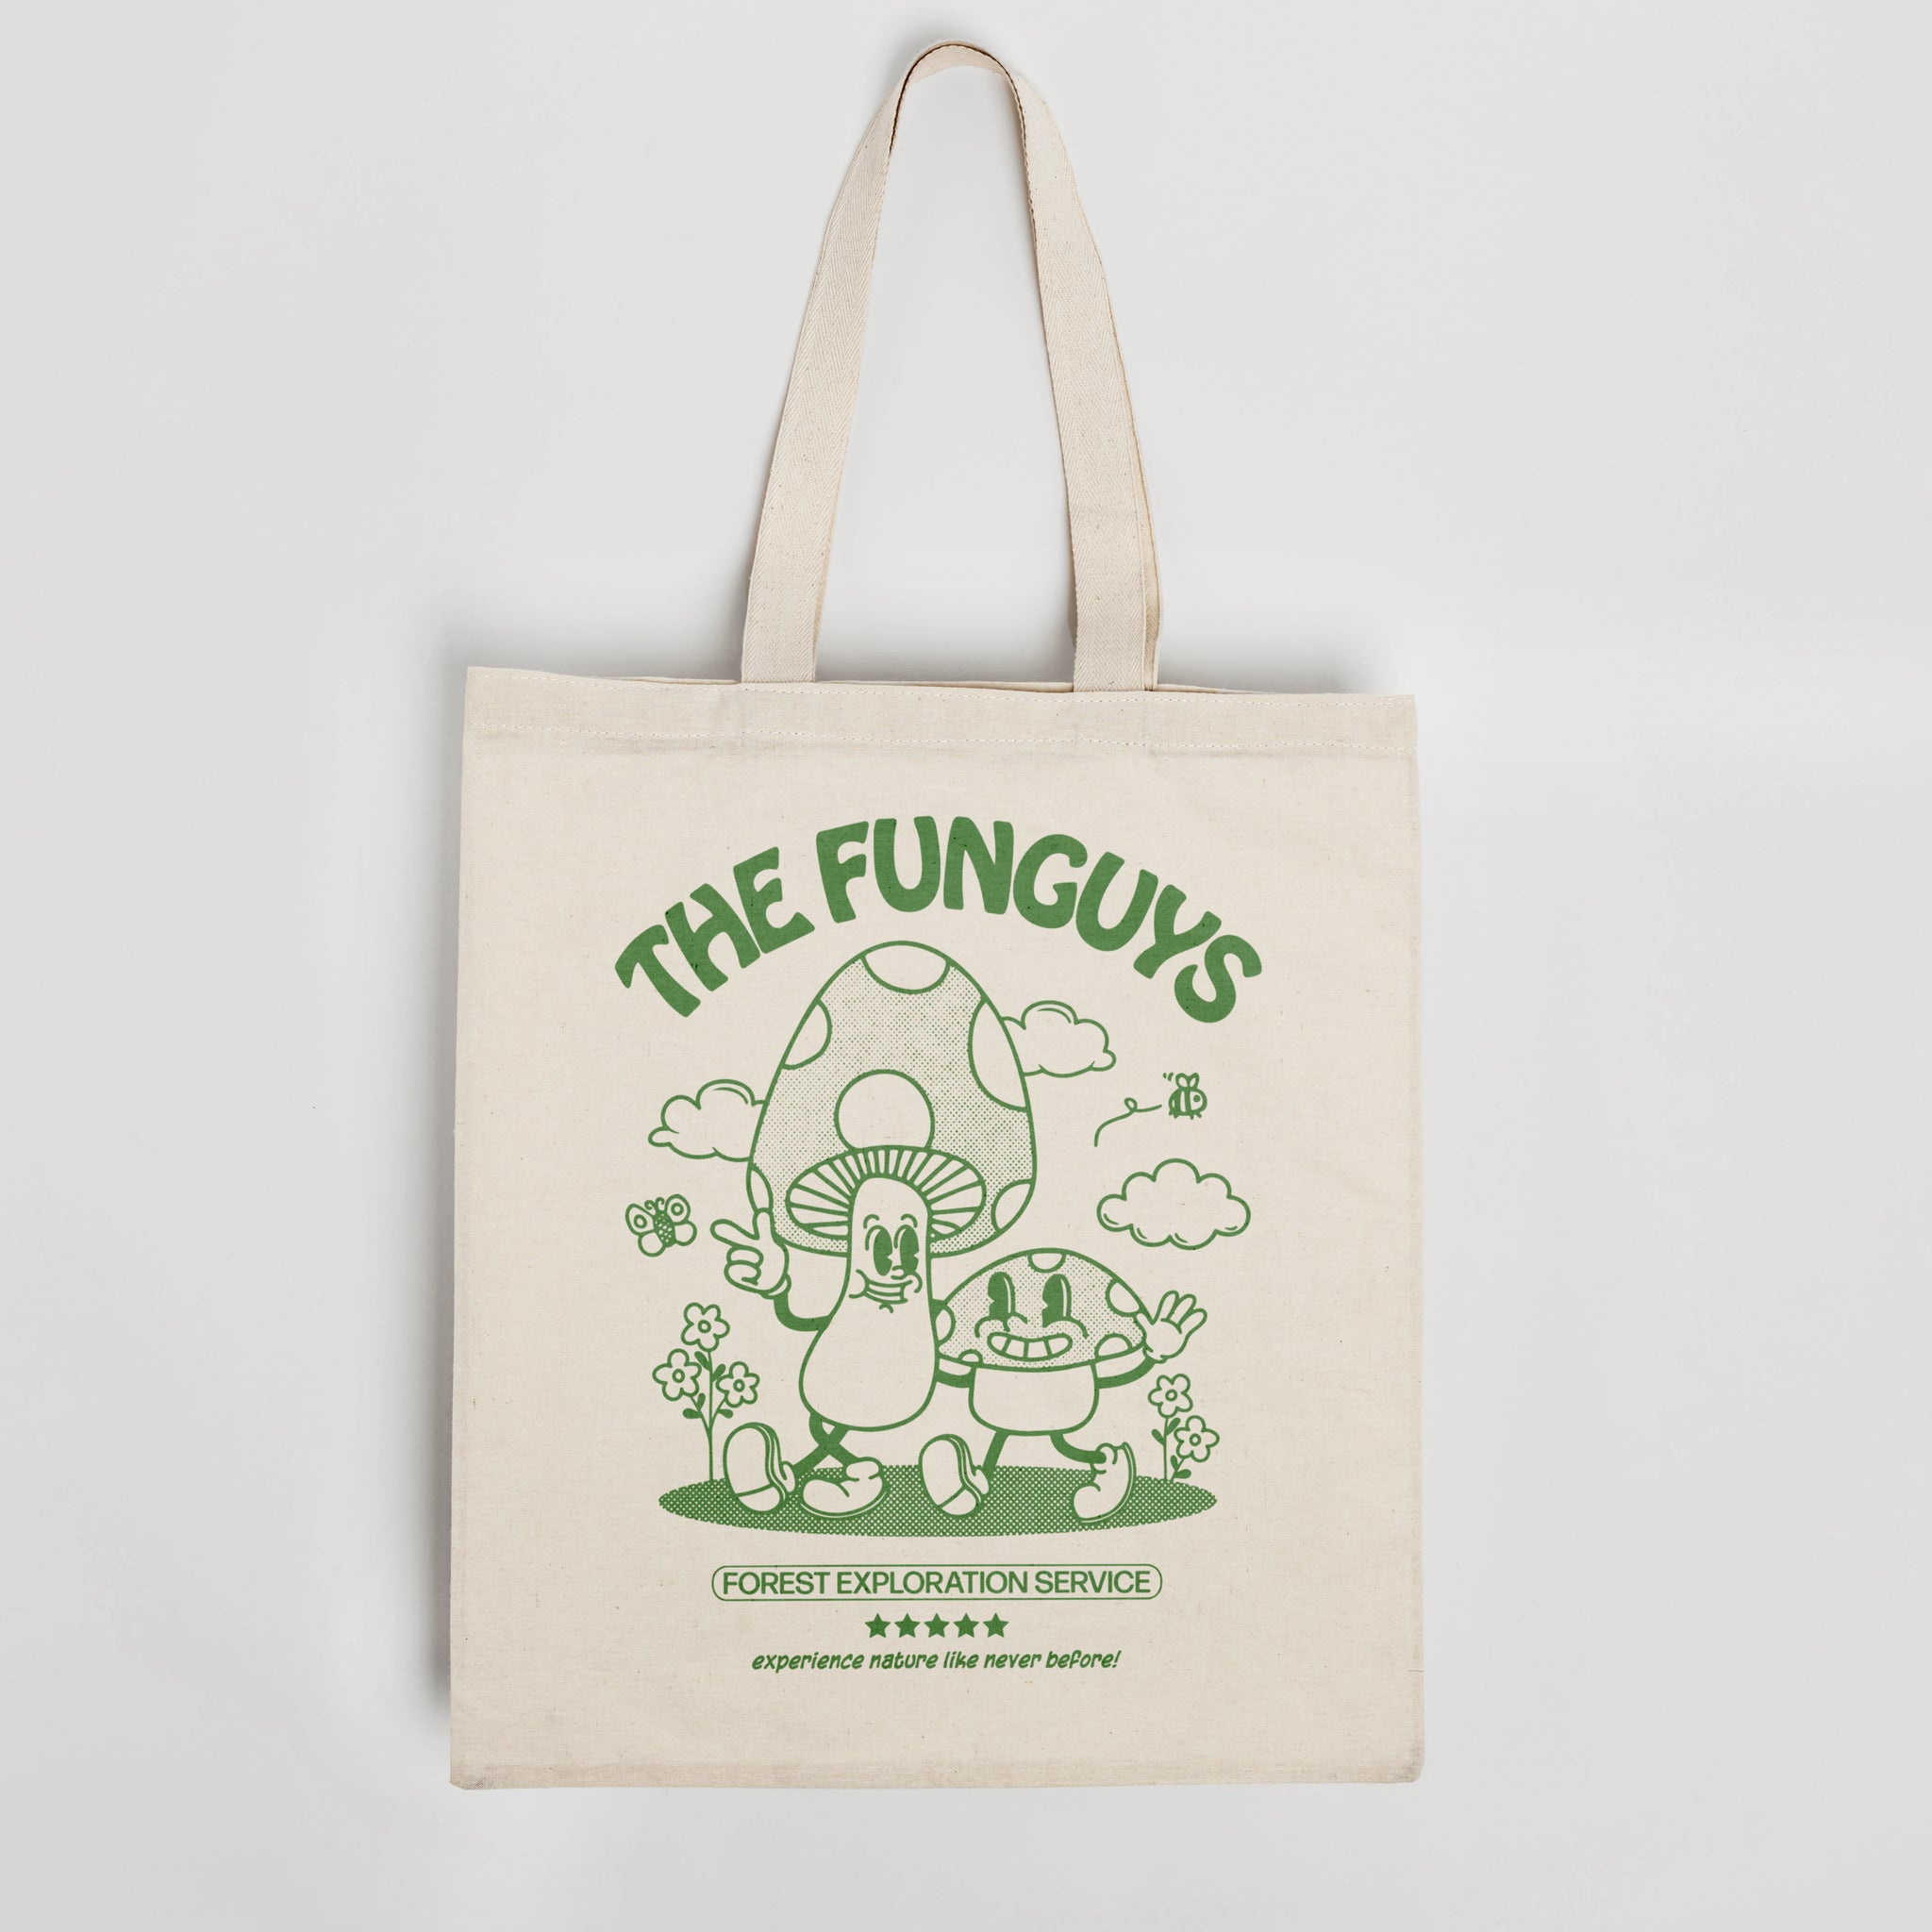 'The Funguys' organic cotton canvas tote bag